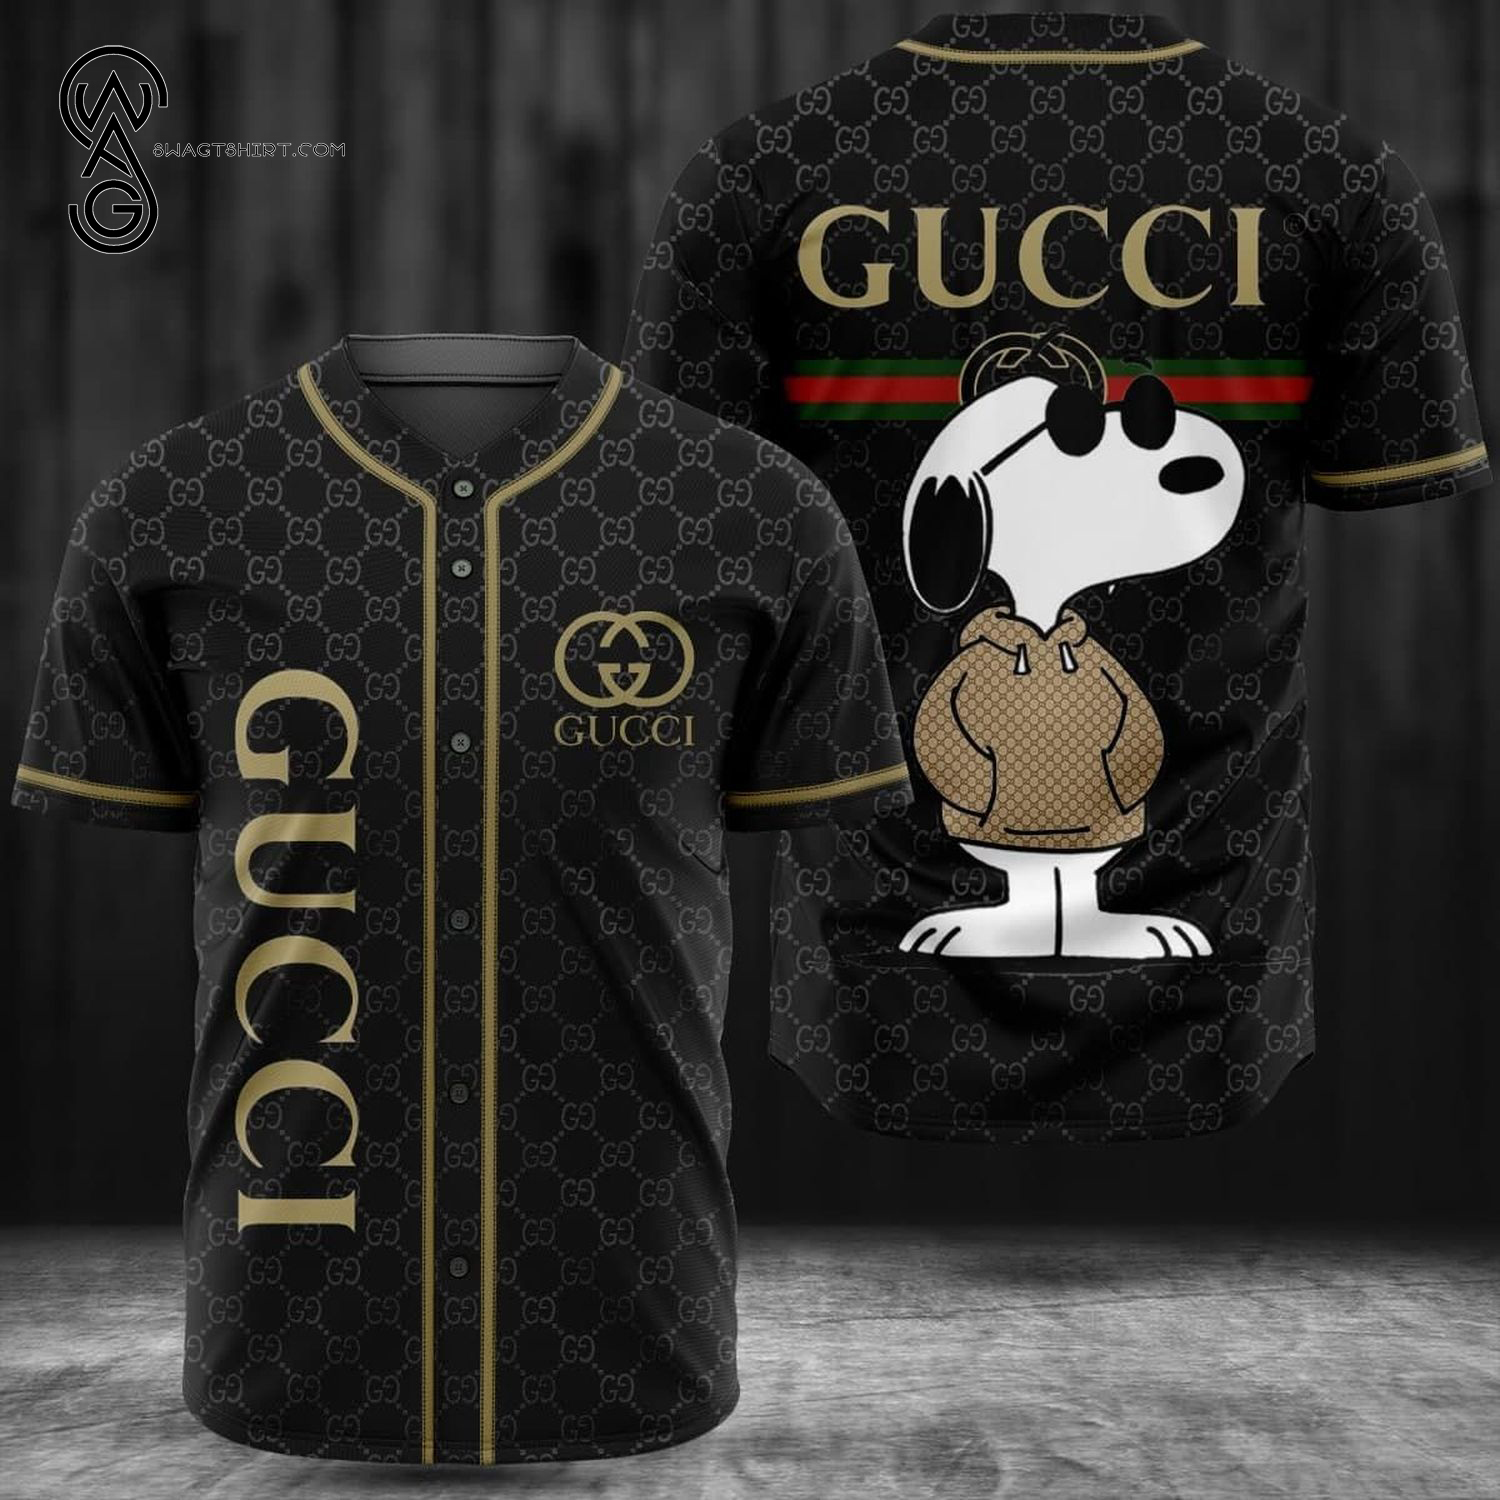 Gucci And Snoopy Full Printed Baseball Jersey